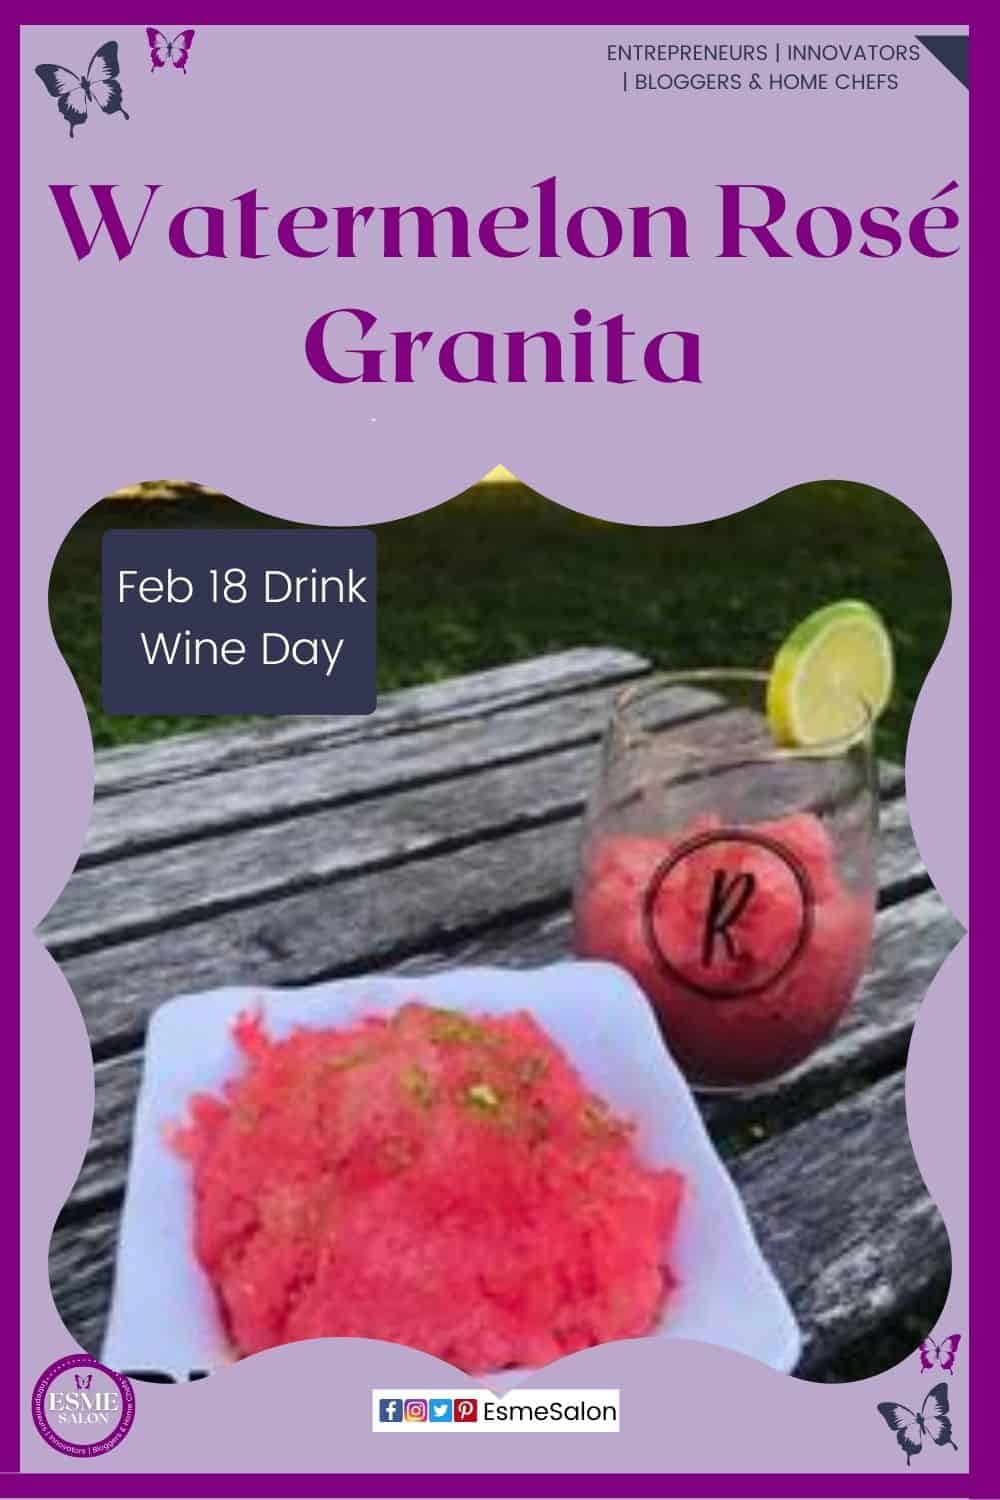 an image of a white plate as well as glass on a wooden slatted table filled with Watermelon Granita